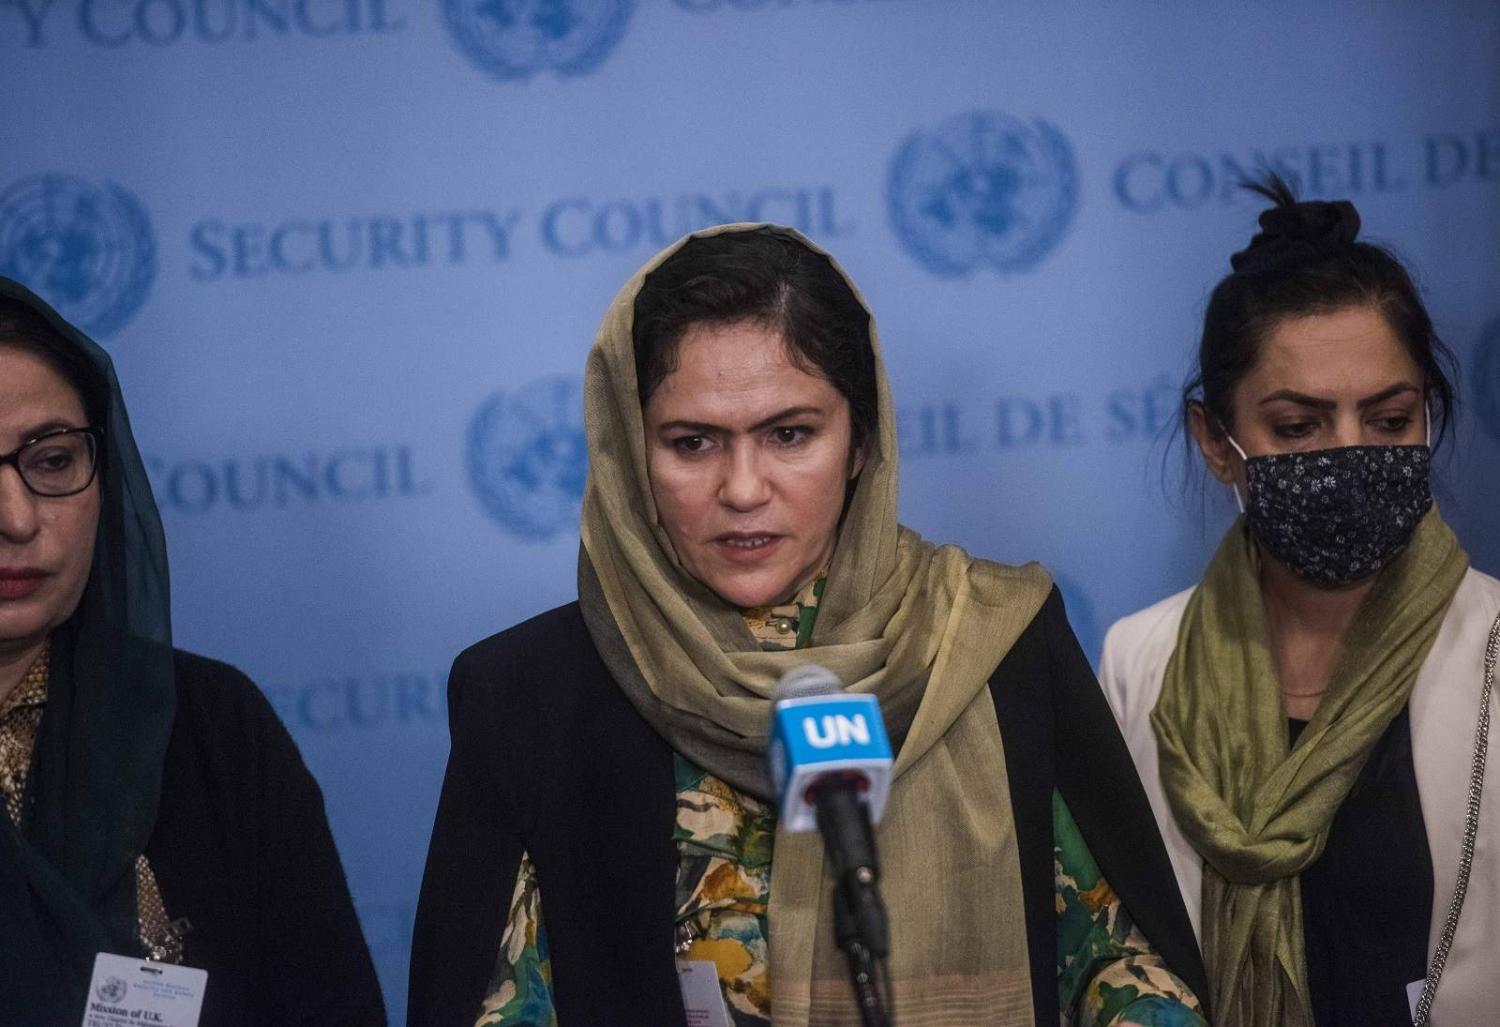 Afghan women leaders speak at the UN: “Give us a seat at the table.” 21 October 2021 (UN Women/ Amanda Voisard/Flickr)